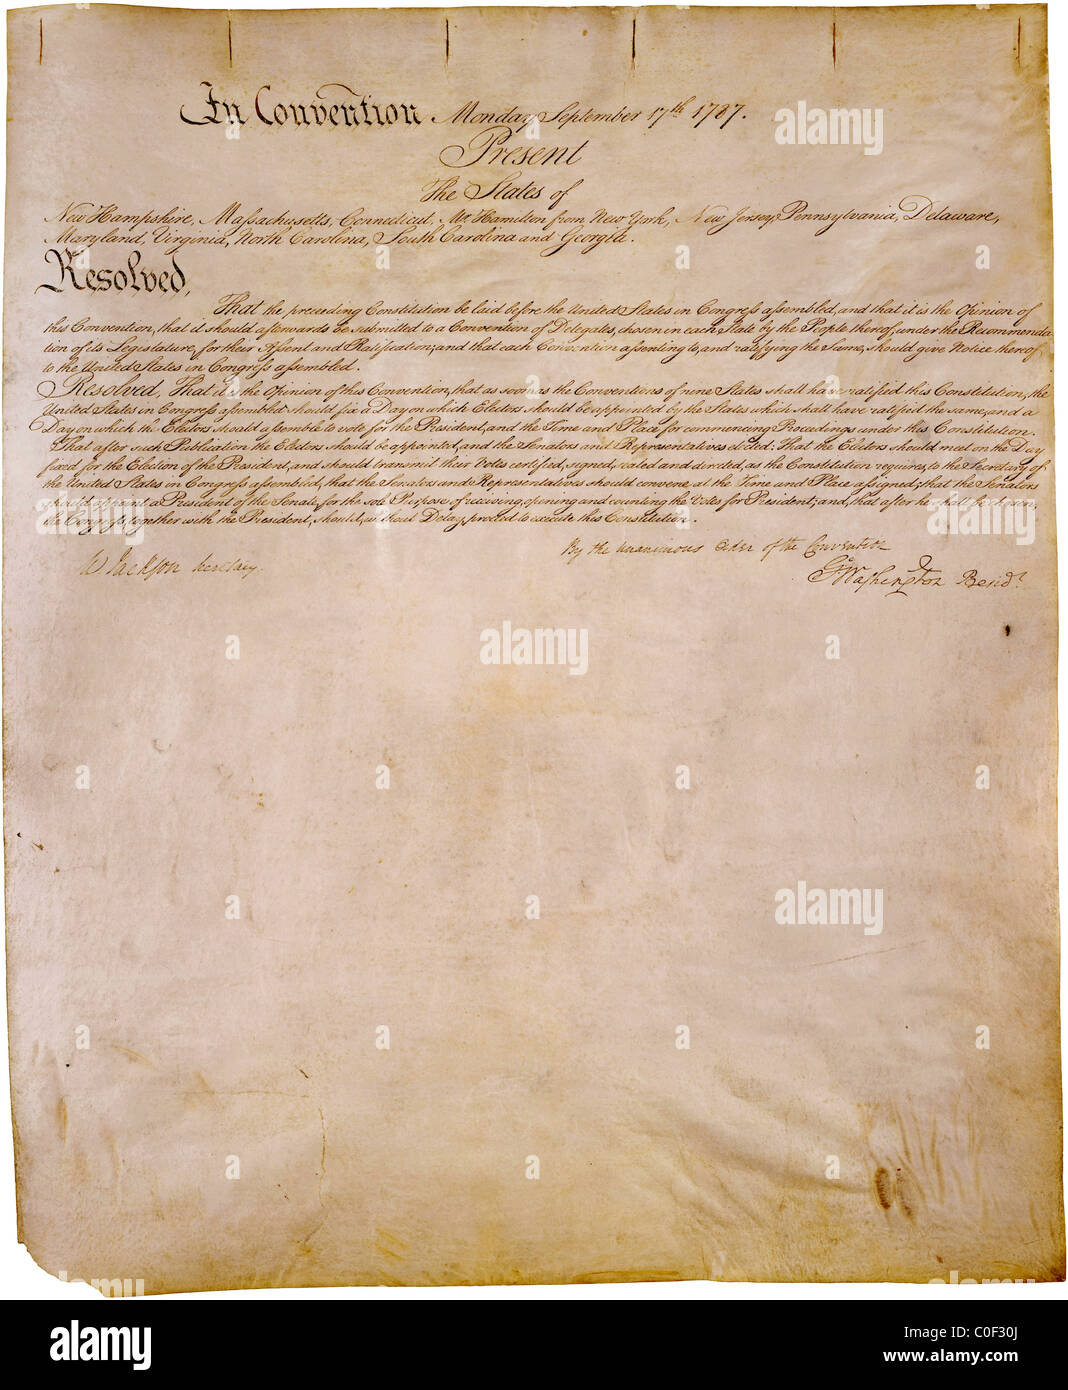 Transmittal Page of the US Constitution - original hand written copy on parchment - adopted on September 17, 1787 Stock Photo